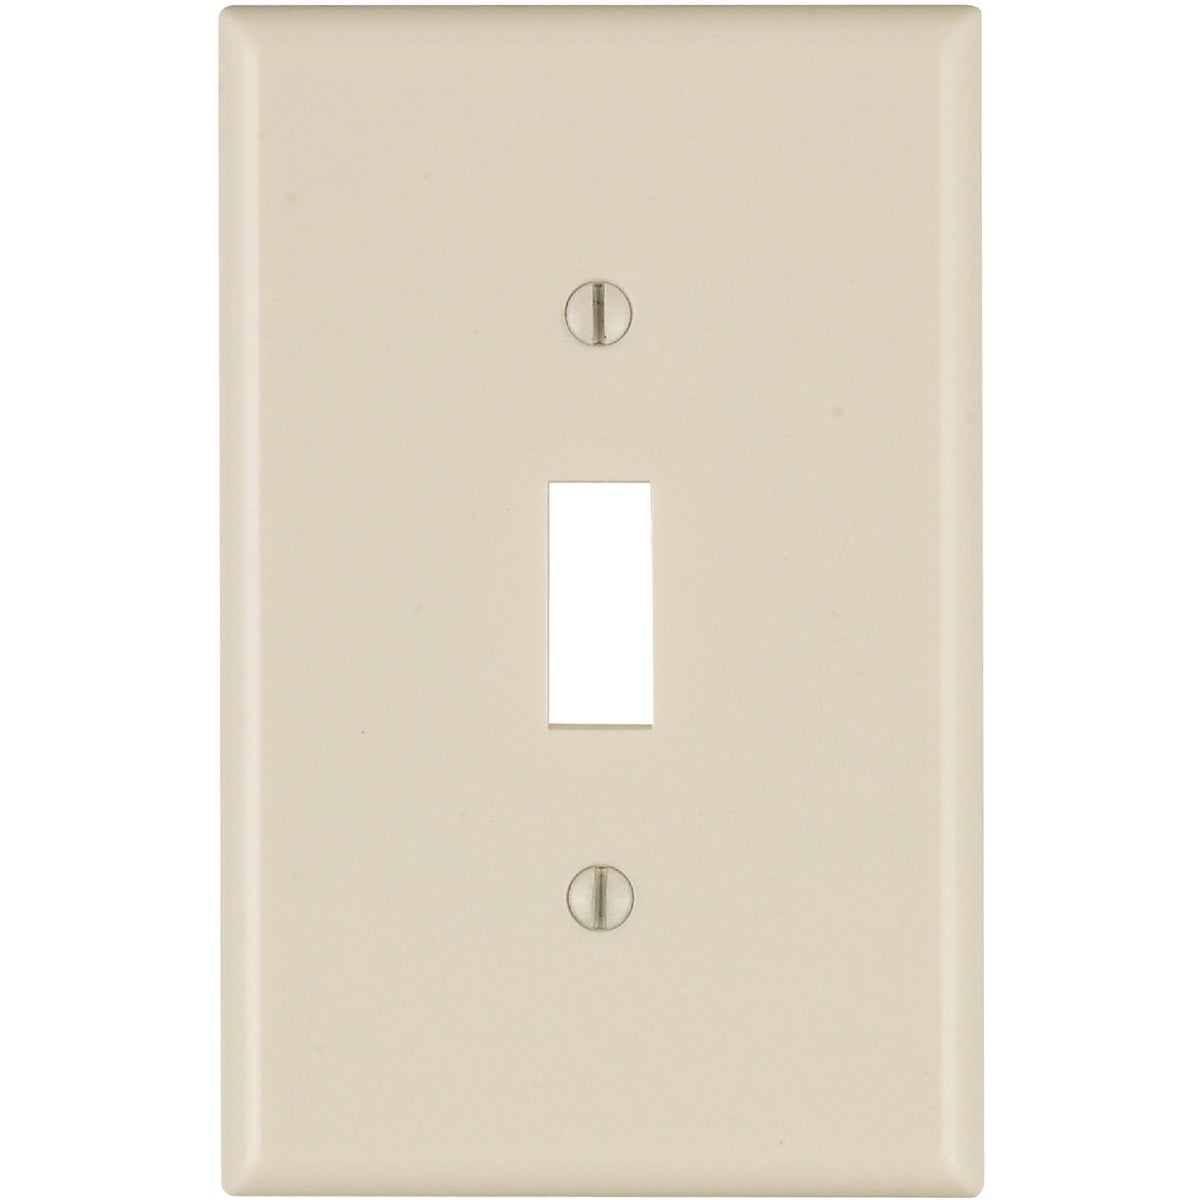 Item 513768, Smooth plastic mid-way size toggle switch wall plate.